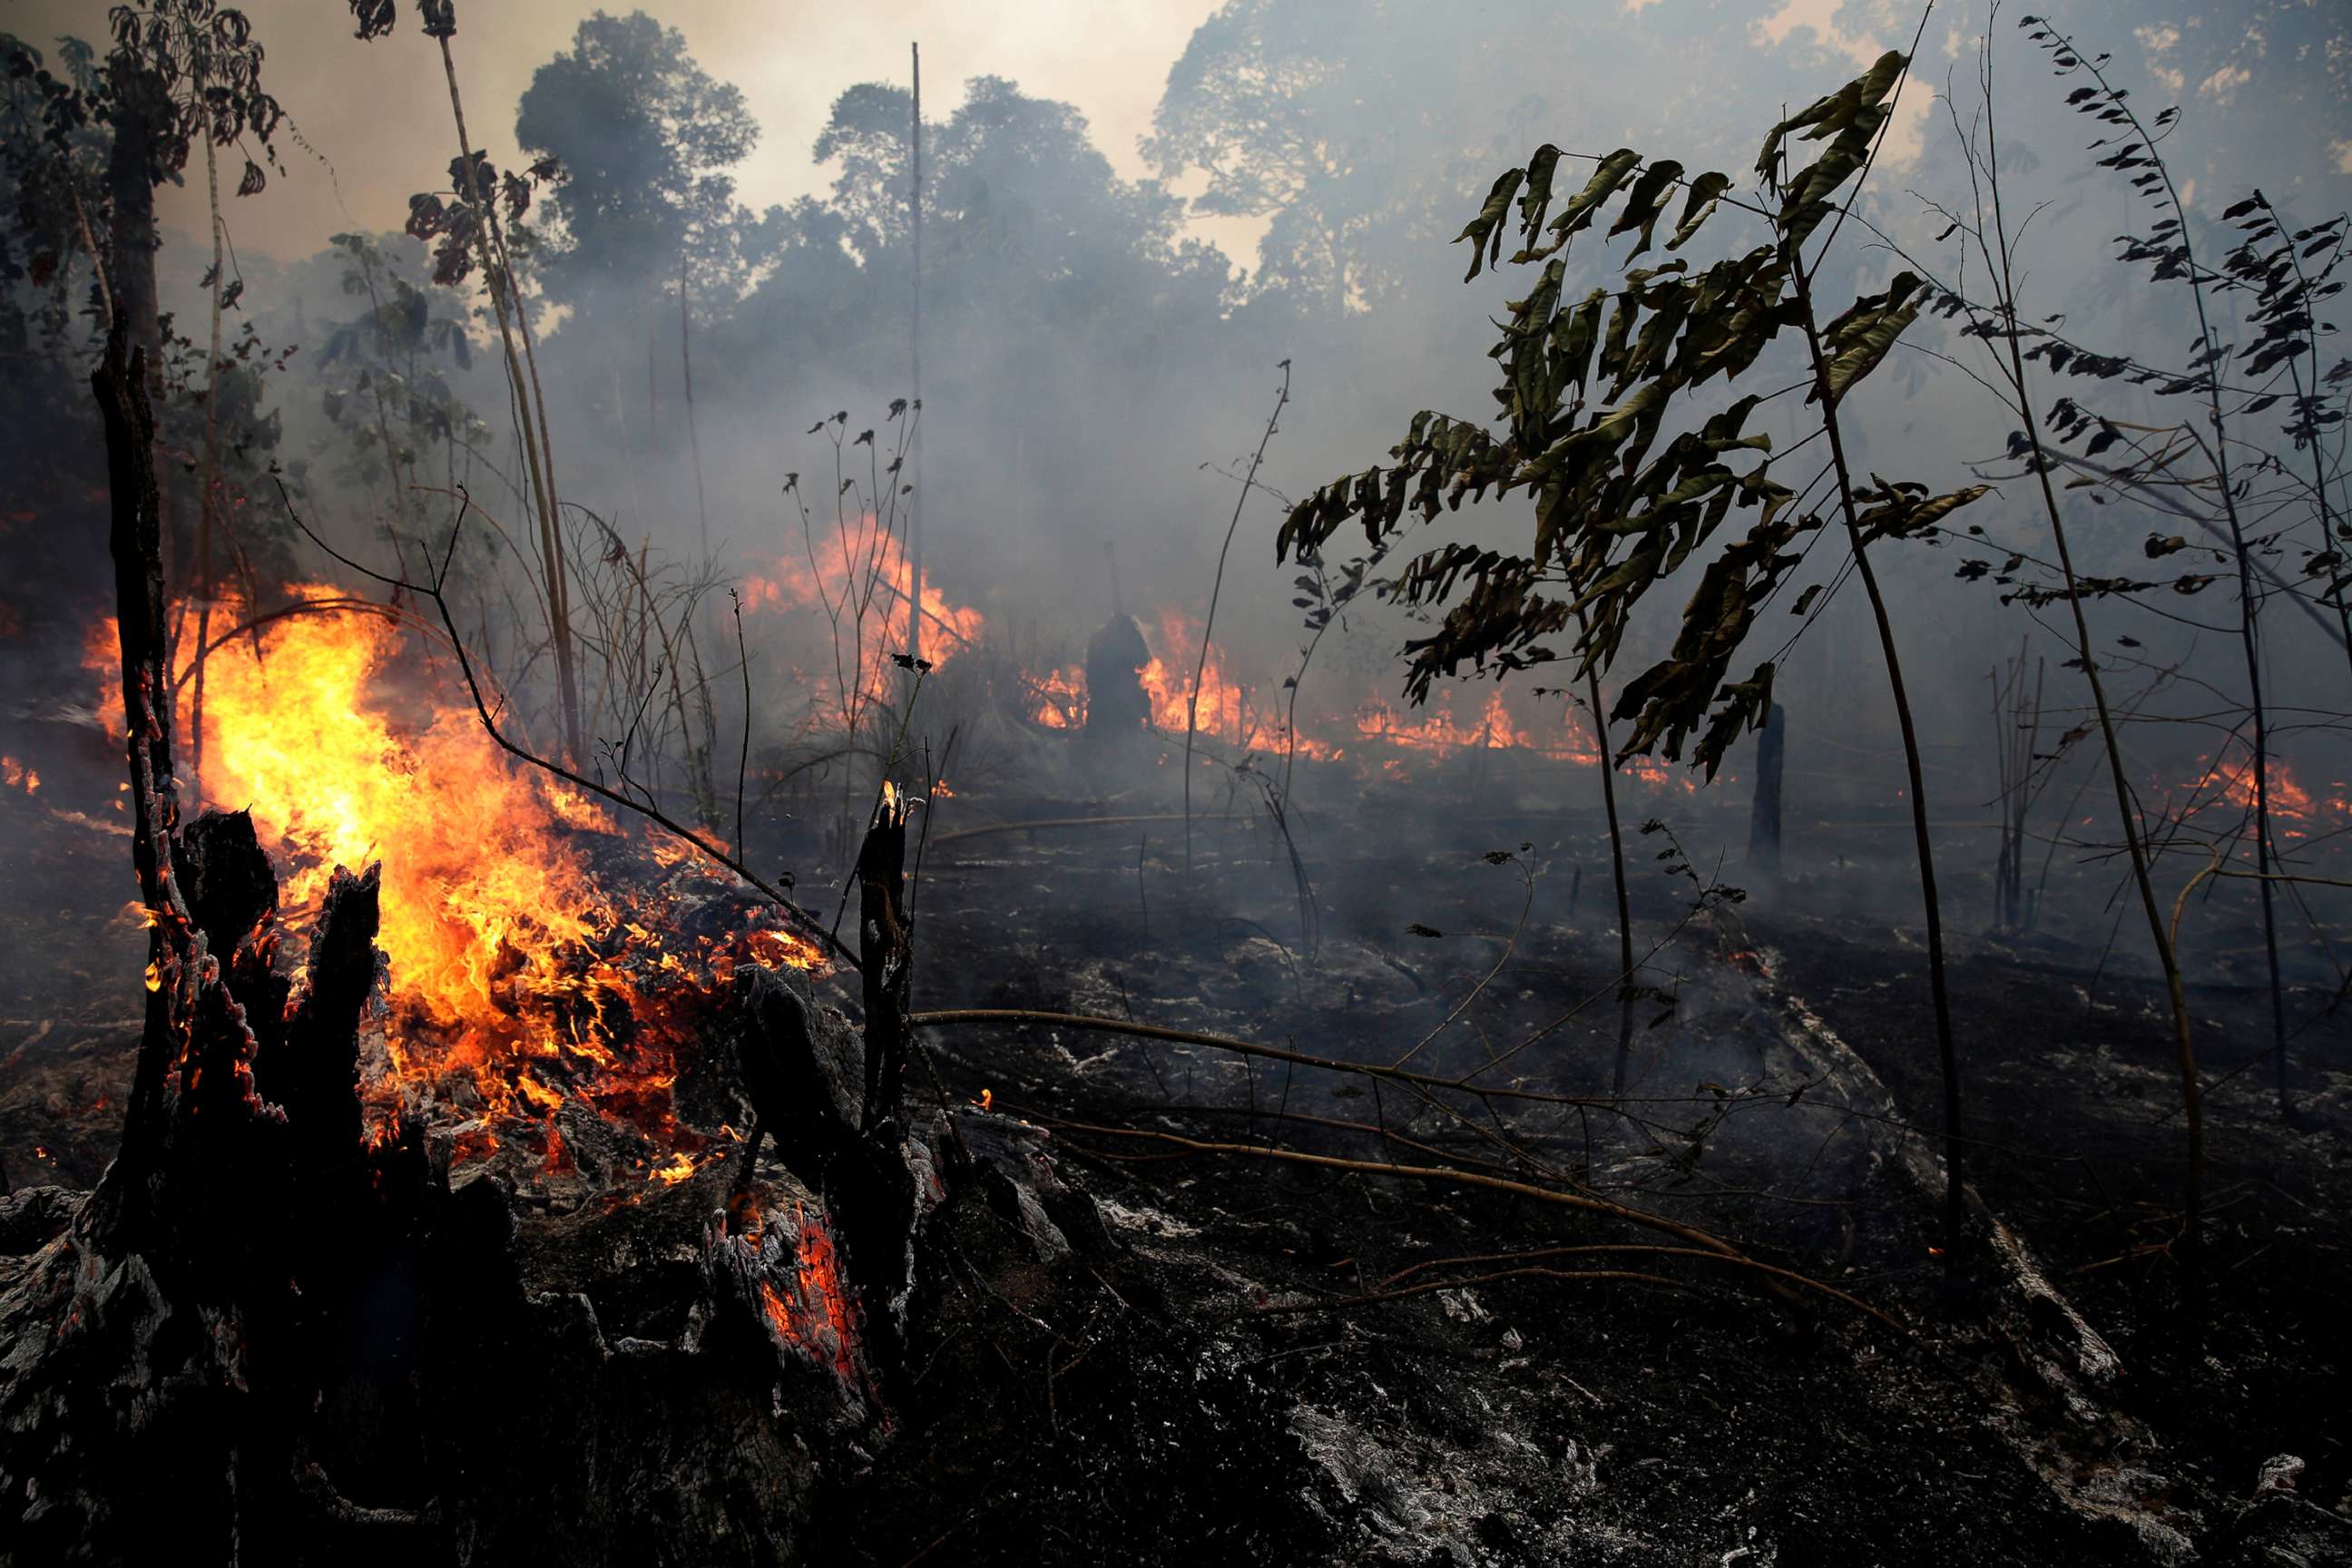 PHOTO: A fire burns trees and brush along the road to Jacunda National Forest, near the city of Porto Velho in the Vila Nova Samuel region which is part of Brazil's Amazon, Monday, Aug. 26, 2019.